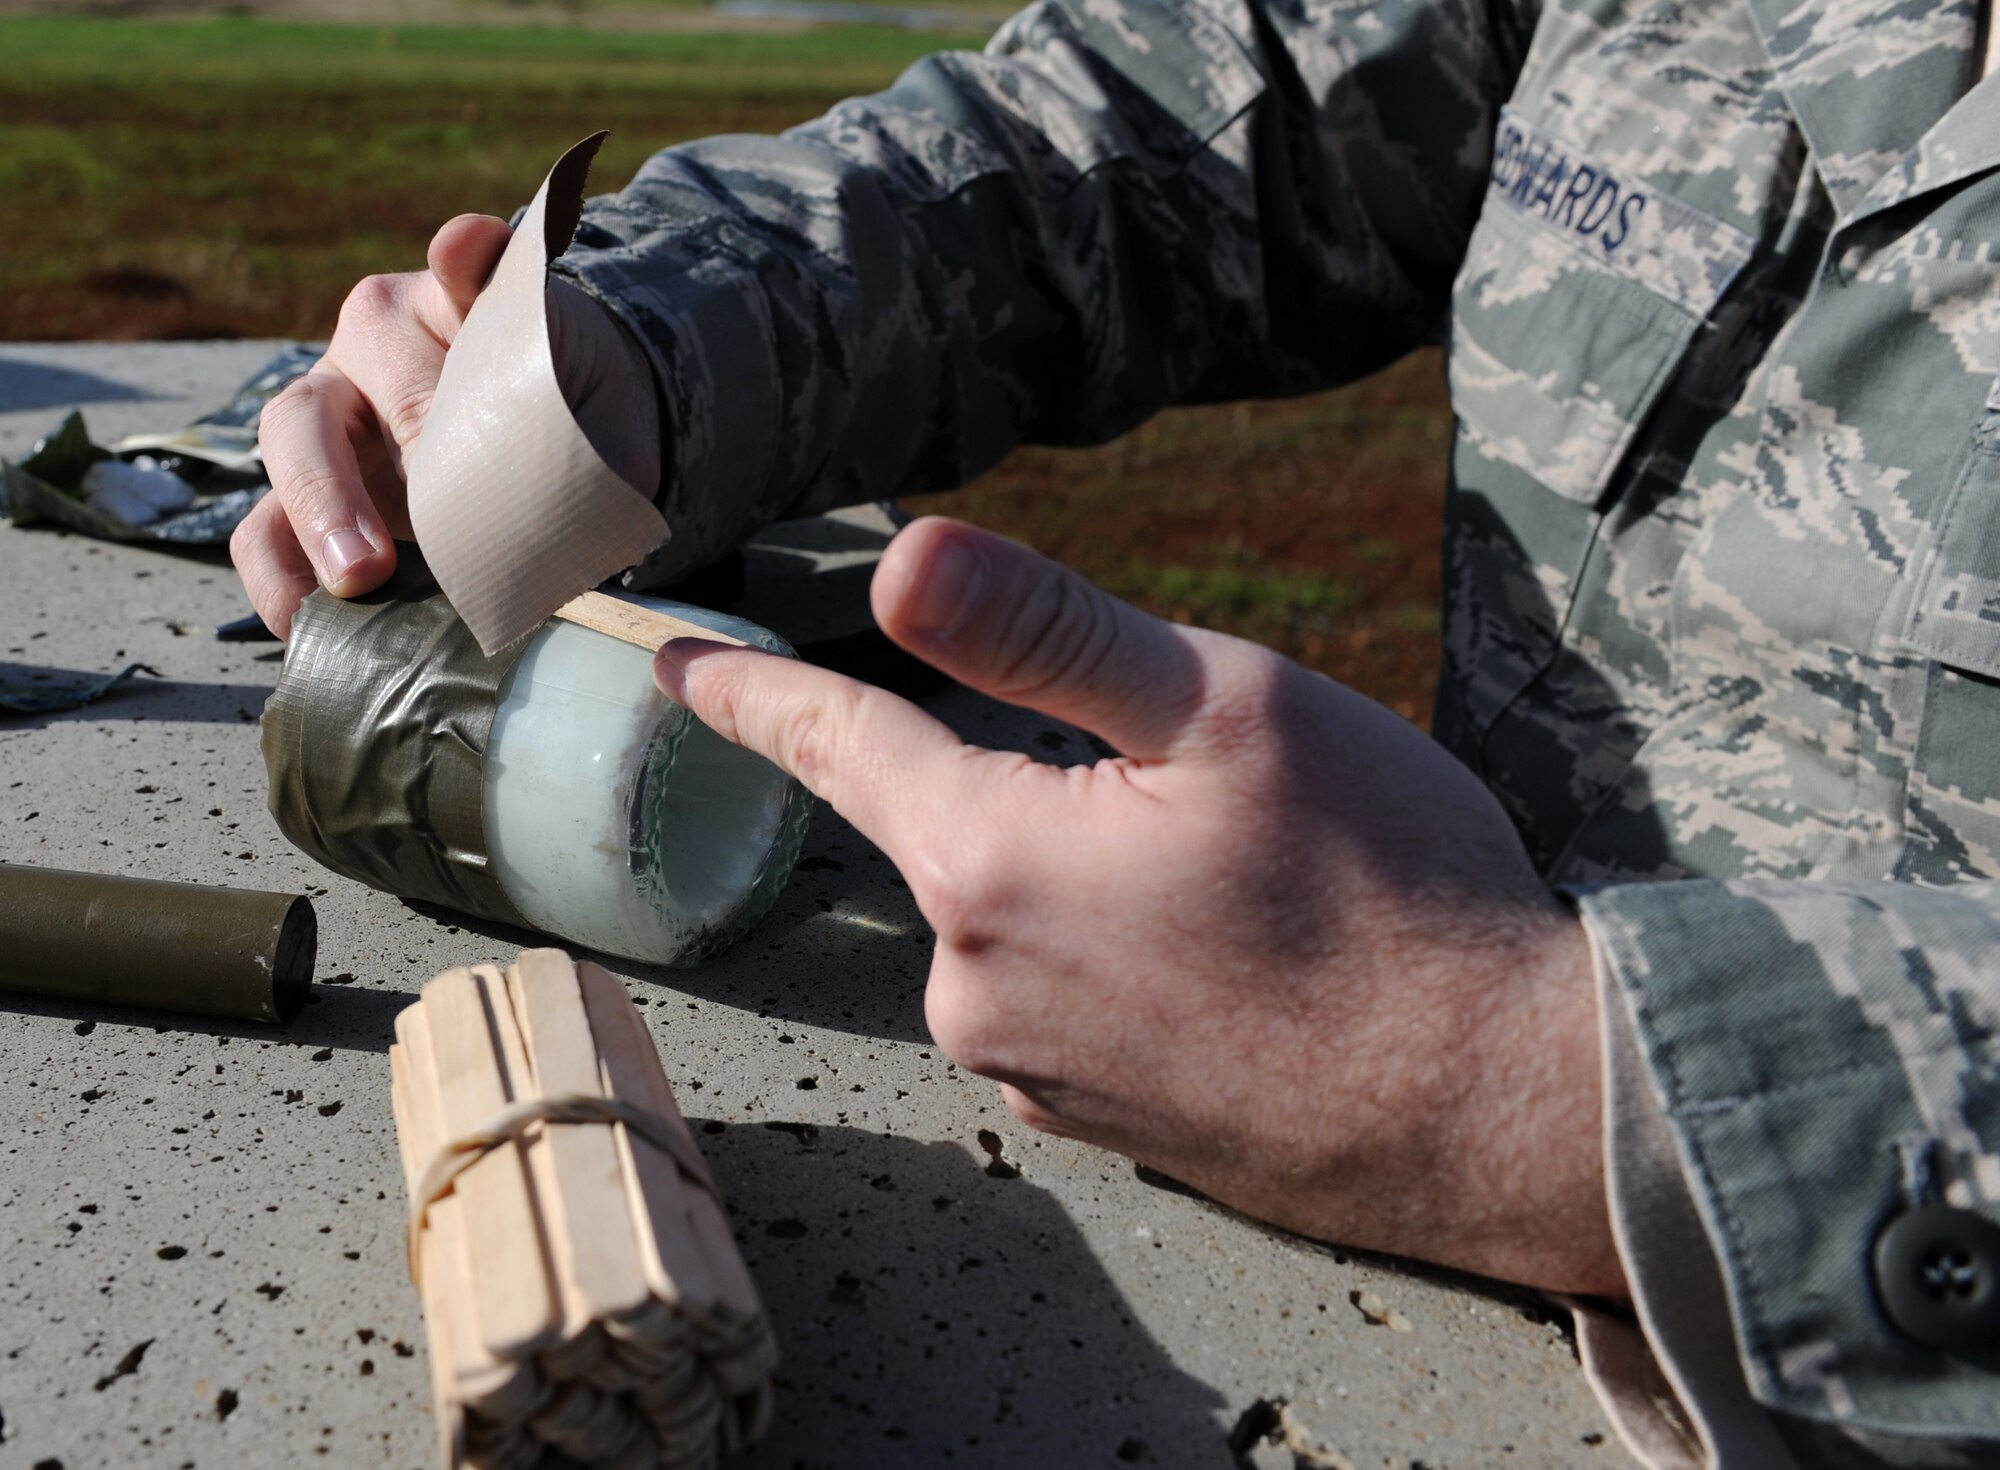 Senior Airman Kile Edwards, 9th Civil Engineer Squadron explosive ordinance disposal technicians prepares a shaped charge explosive using a glass bottle during a training scenario at the EOD range on Beale Air Force Base, Calif., Dec. 19, 2012. EOD Airmen train with different types of explosives to simulate what they may encounter in the field. (U.S. Air Force photo by Staff Sgt. Robert M. Trujillo/Released)